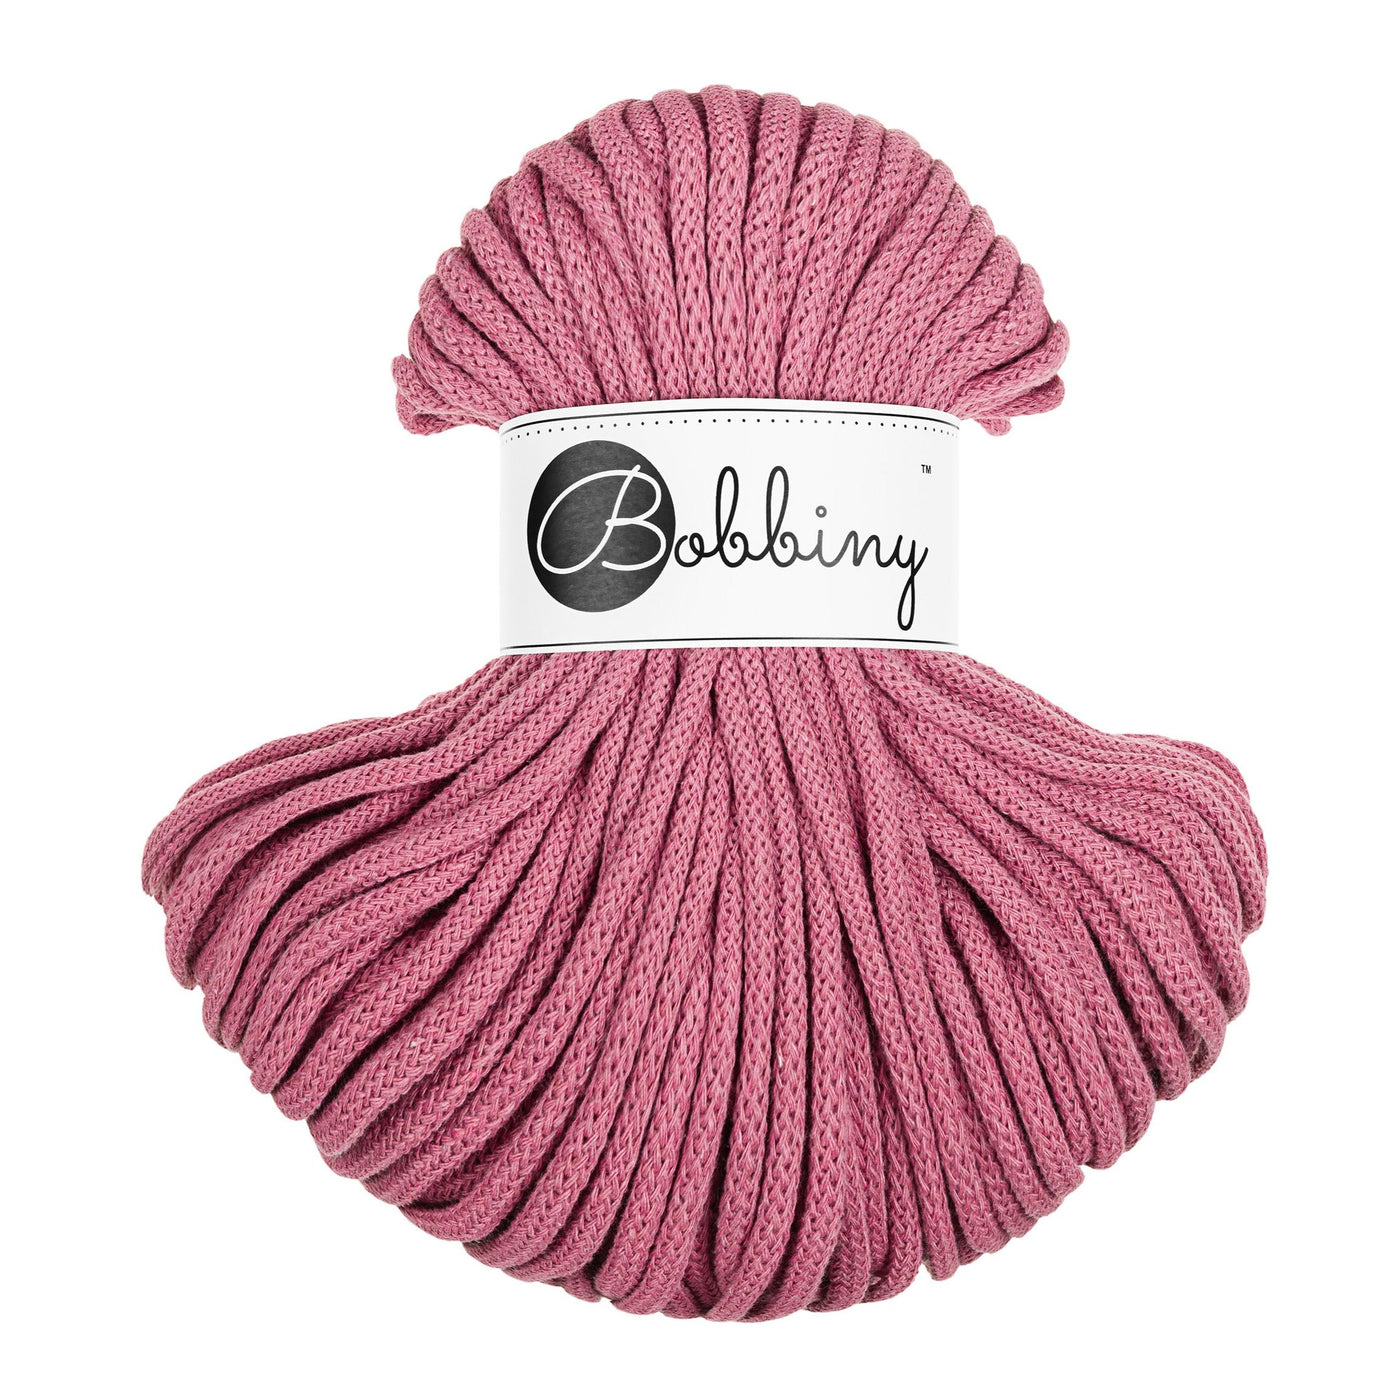 Bobbiny braided cord 5mm 50m in blossom pink shade